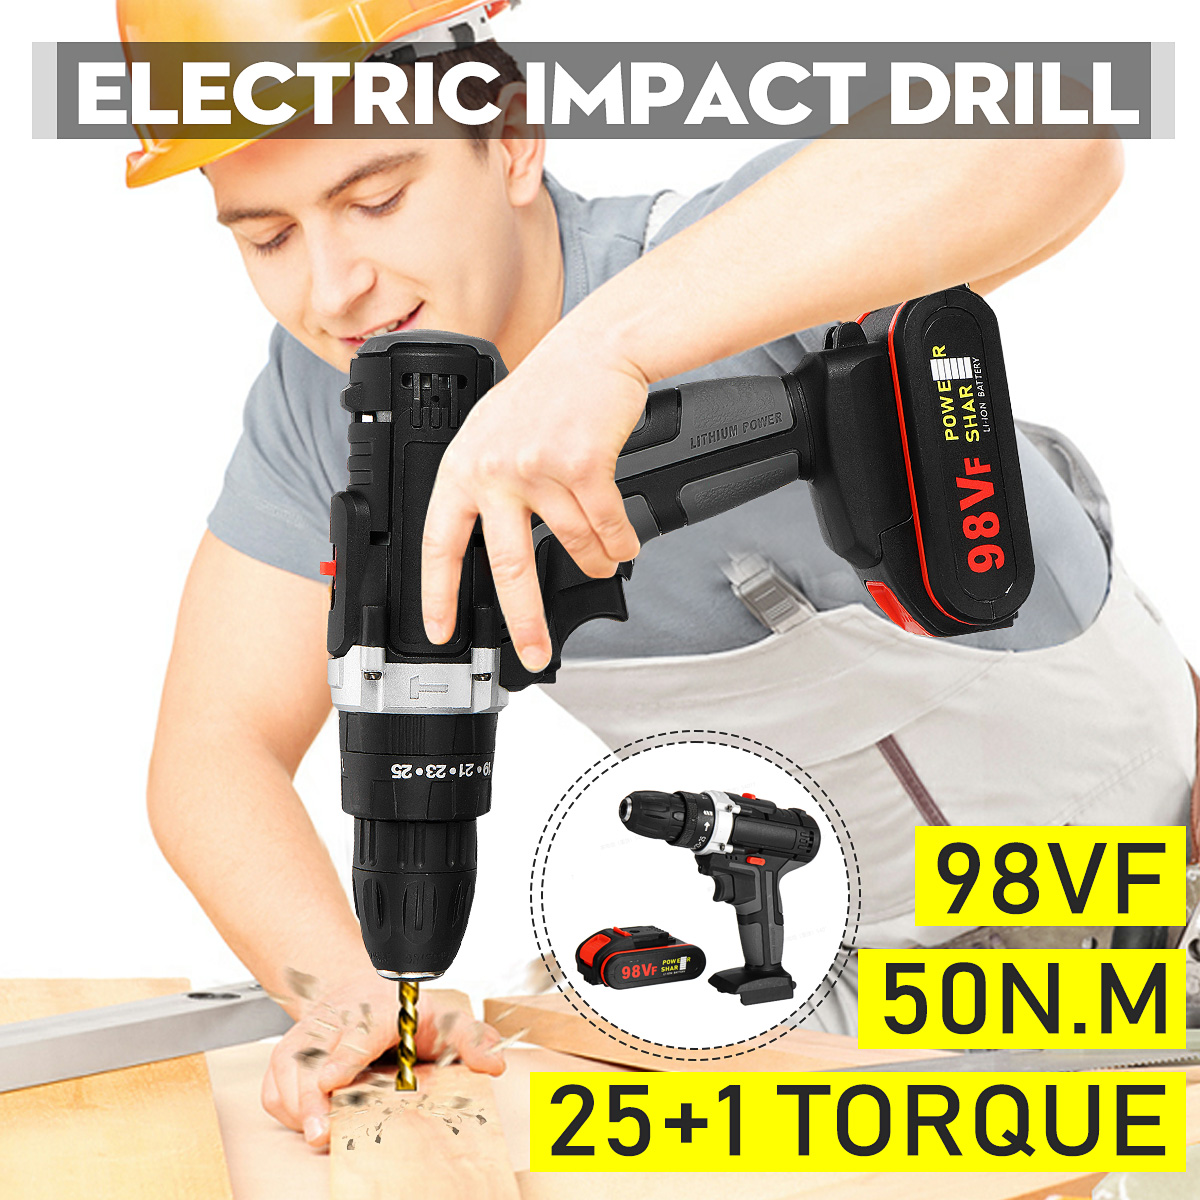 98VF-Cordless-Electric-Impact-Drill-Screwdriver-251-Torque-Rechargeable-Household-Screwdriver-1764622-2